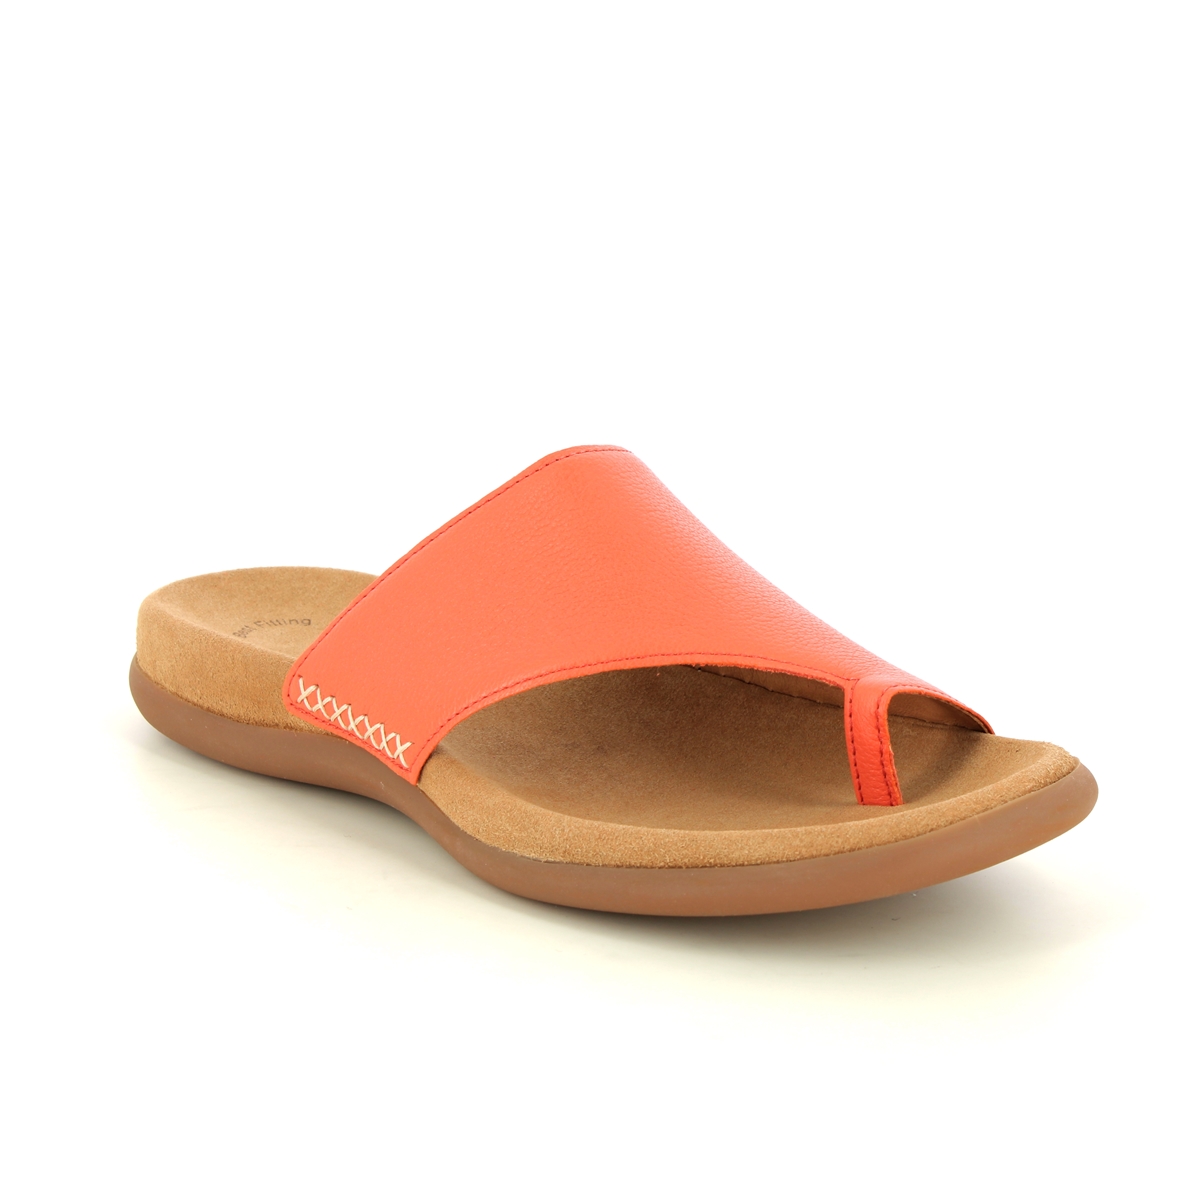 Gabor Lanzarote Orange Leather Womens Toe Post Sandals 43.700.23 in a Plain Leather in Size 40